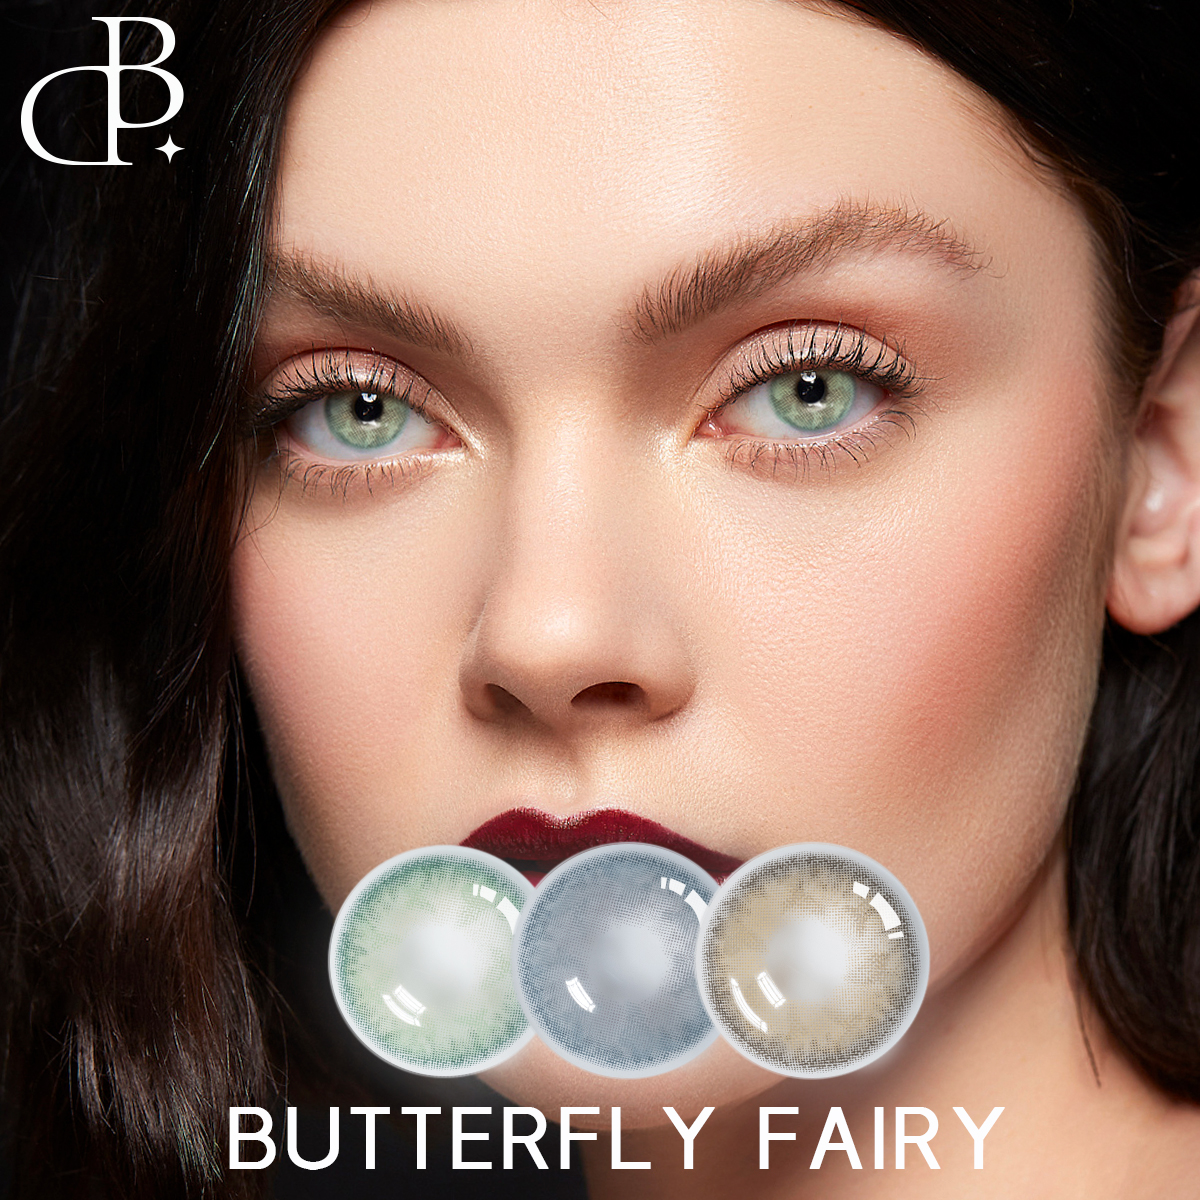 BUTTERFLY FAIRY dbeyes contact lenses new arrival color contact lens softlens ukuran 14.00mm contact lens hot selling kosmetik